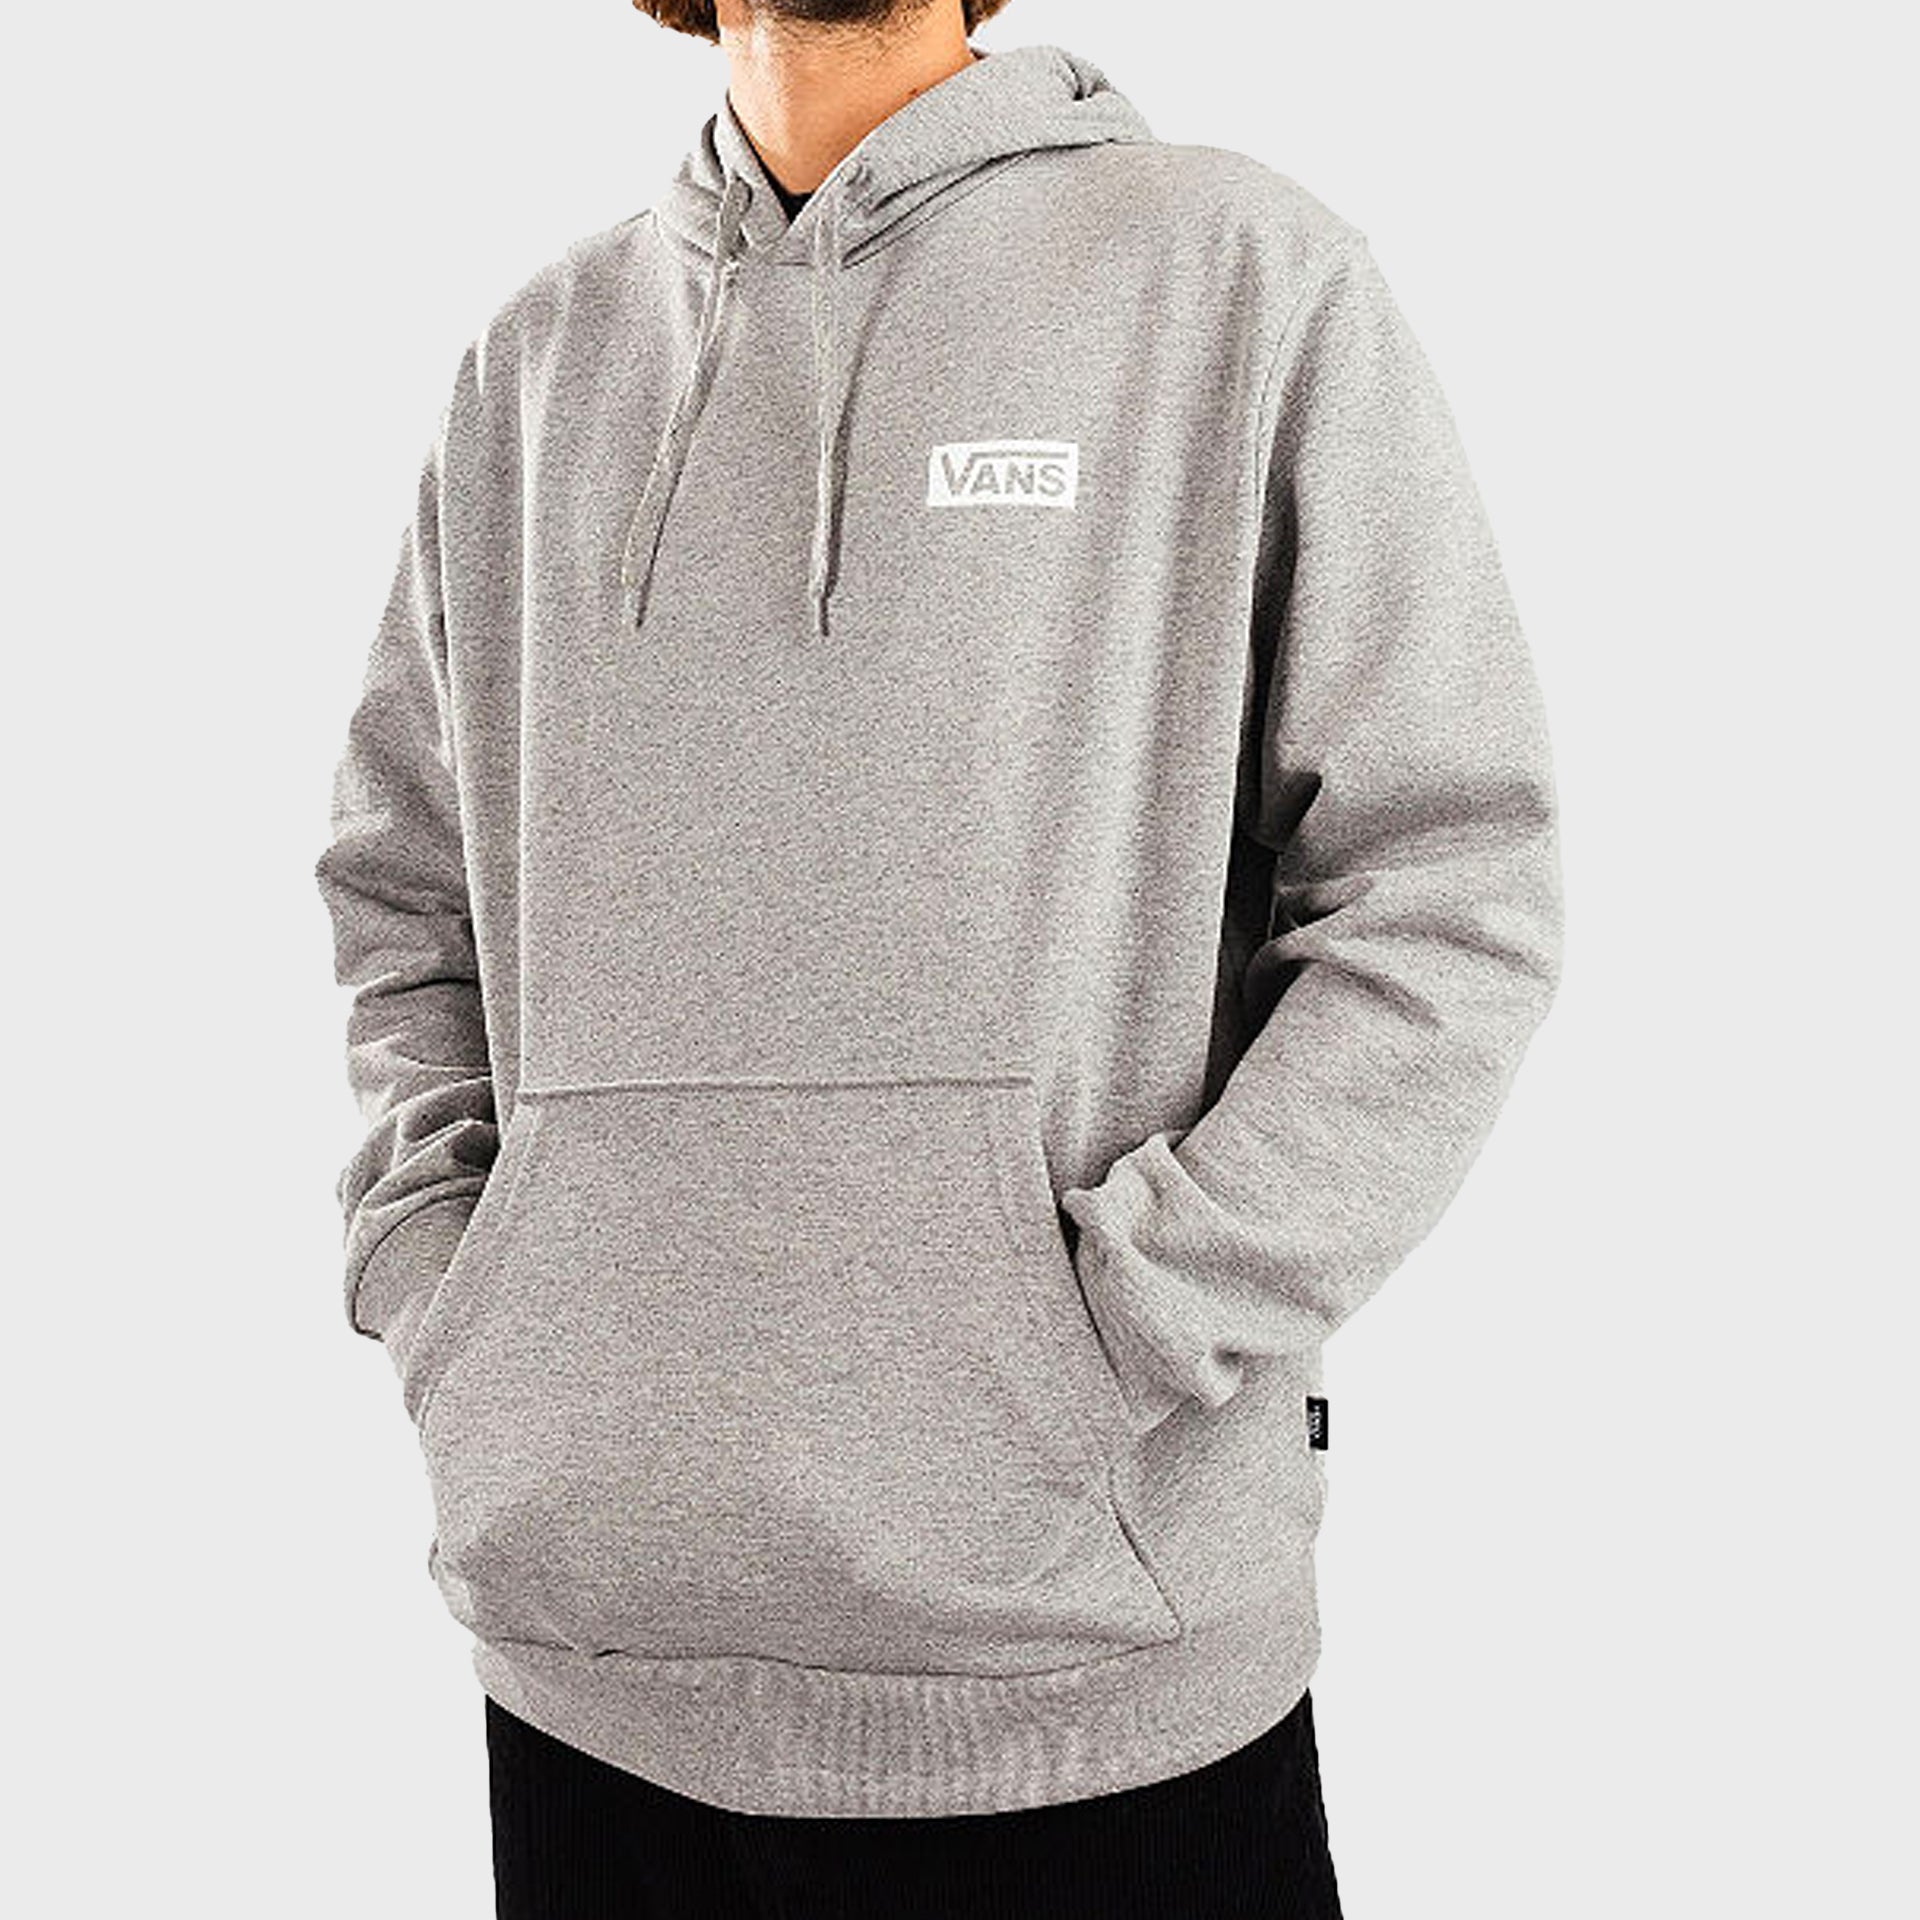 Vans Relaxed Fit Mens Pullover Hoodie - Light Grey Heather - ManGo Surfing